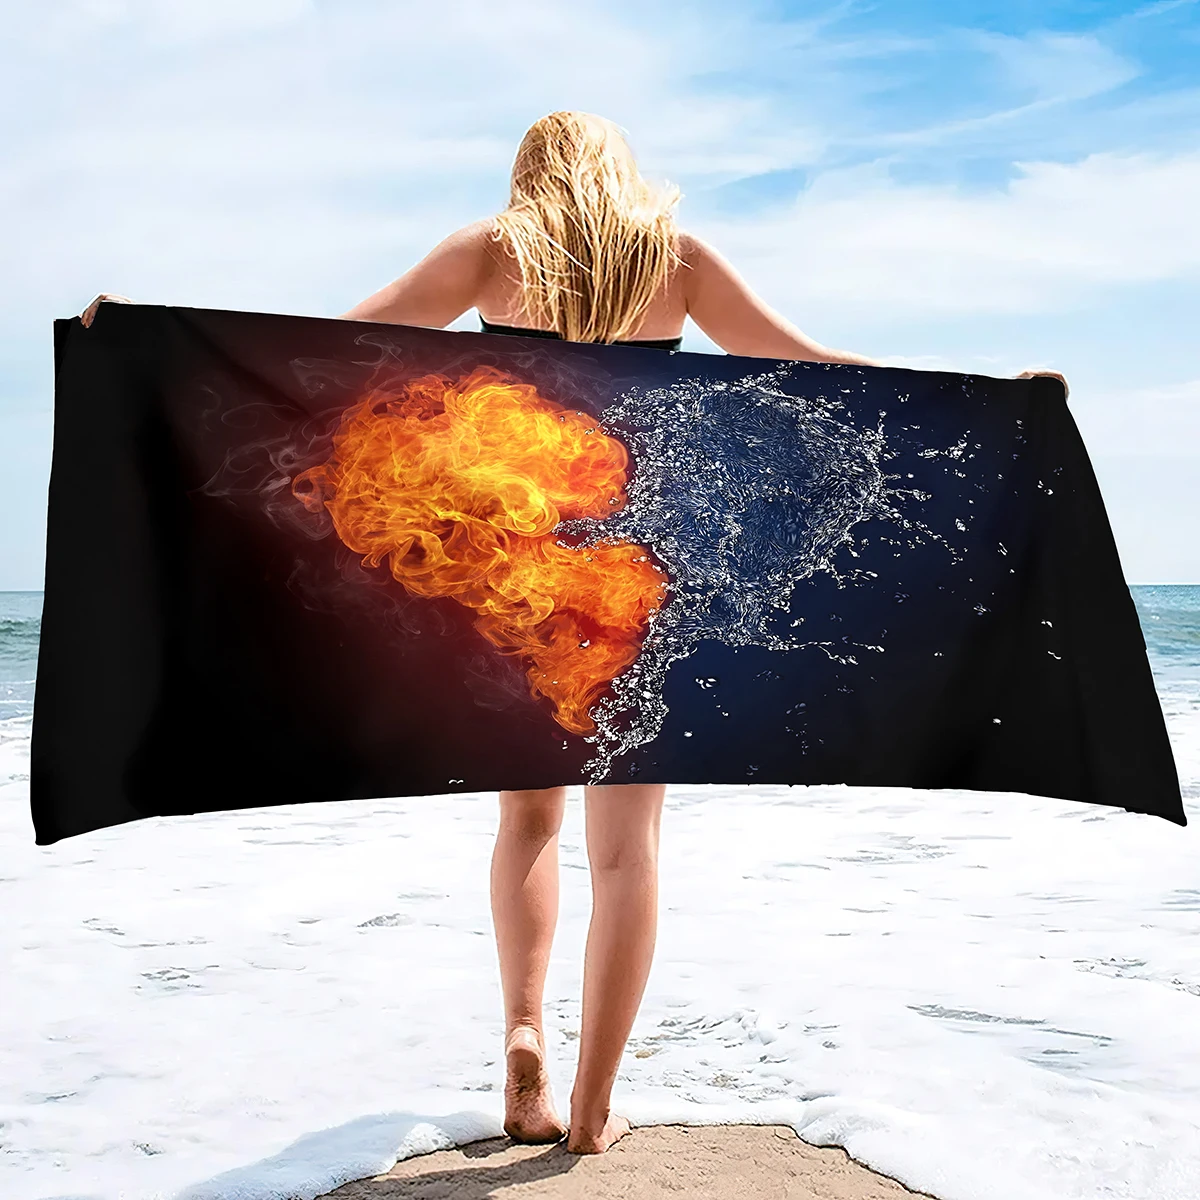 70*140cm Large Oversized Bath Sheets Quick Dry Beach Towel Pool